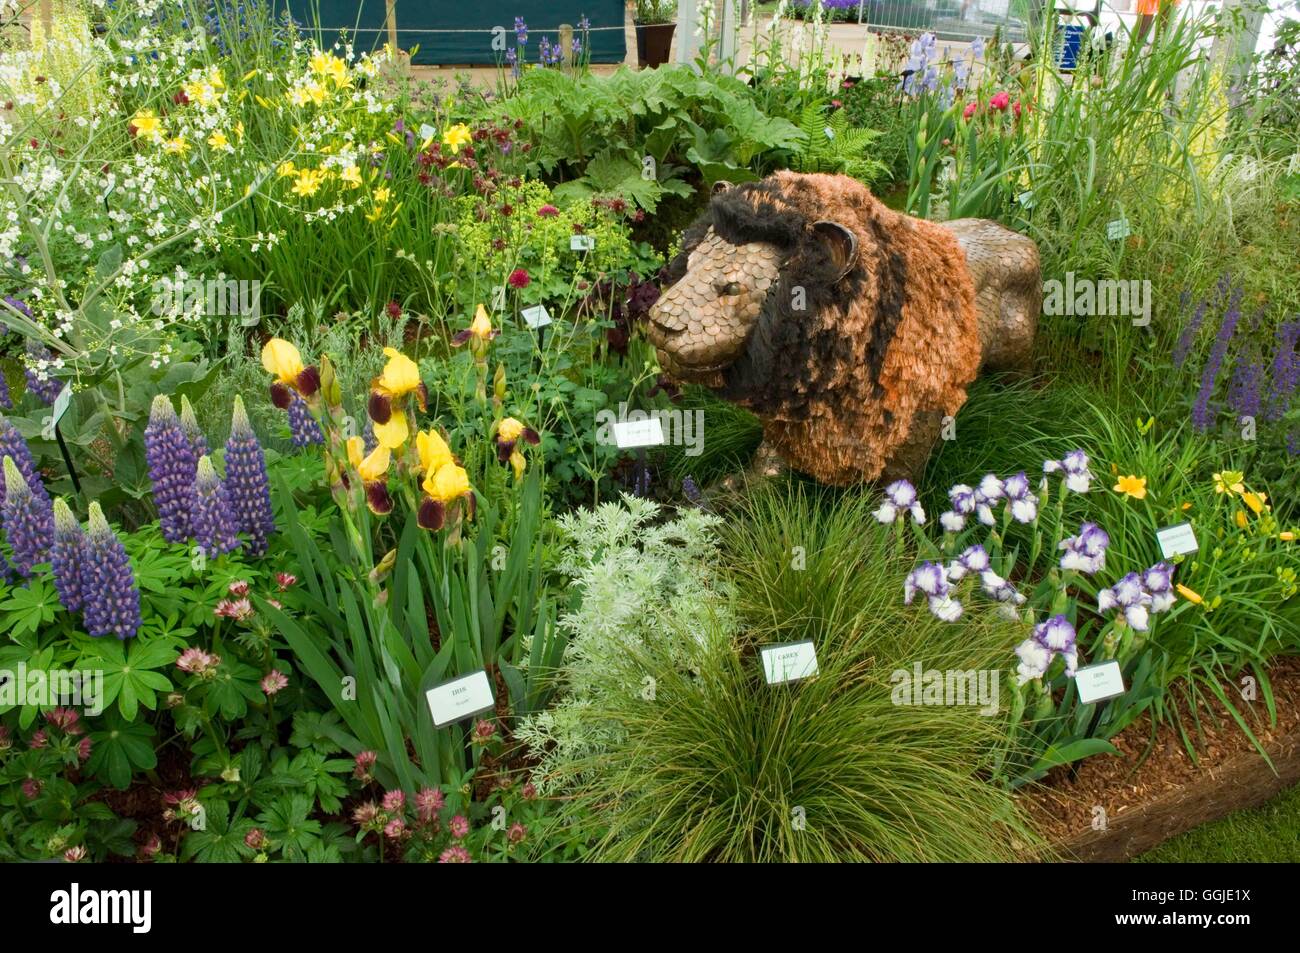 Chelsea Flower Show 2006- - Howard Nurseries Ltd. Lion constructed from 1966 pennies.- - Gold Medal Award   MIW251130 Stock Photo